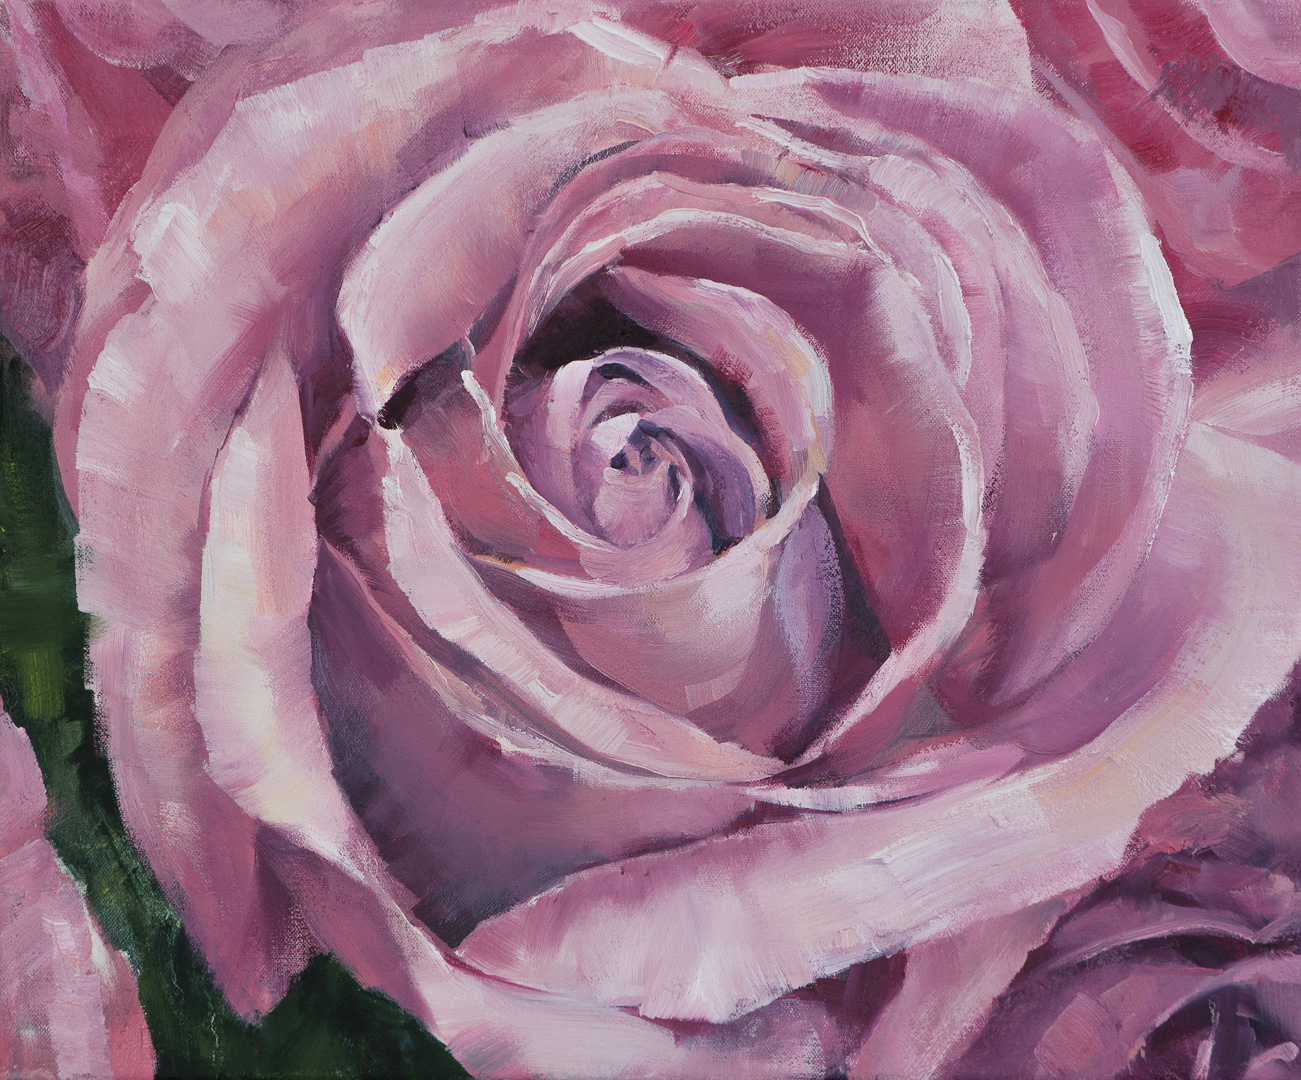 A Rose. Oil on canvas. This floral detail features vibrant magentas against deep rich violet shadows. The petals are painted with energy and confidence allowing the brush to scumble pigment over pigment.